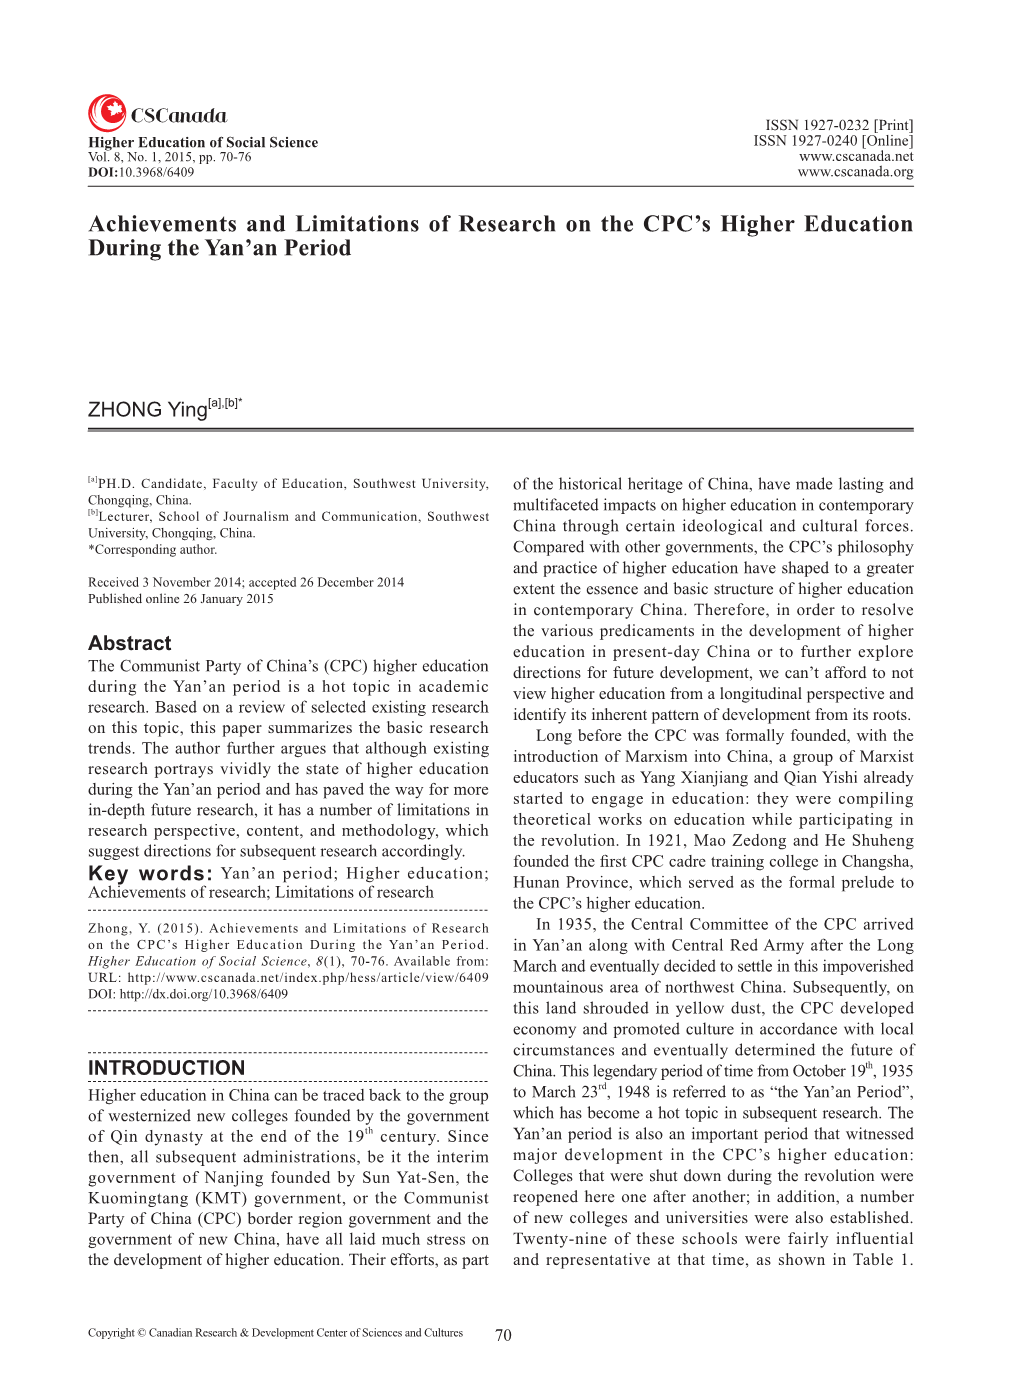 Achievements and Limitations of Research on the CPC's Higher